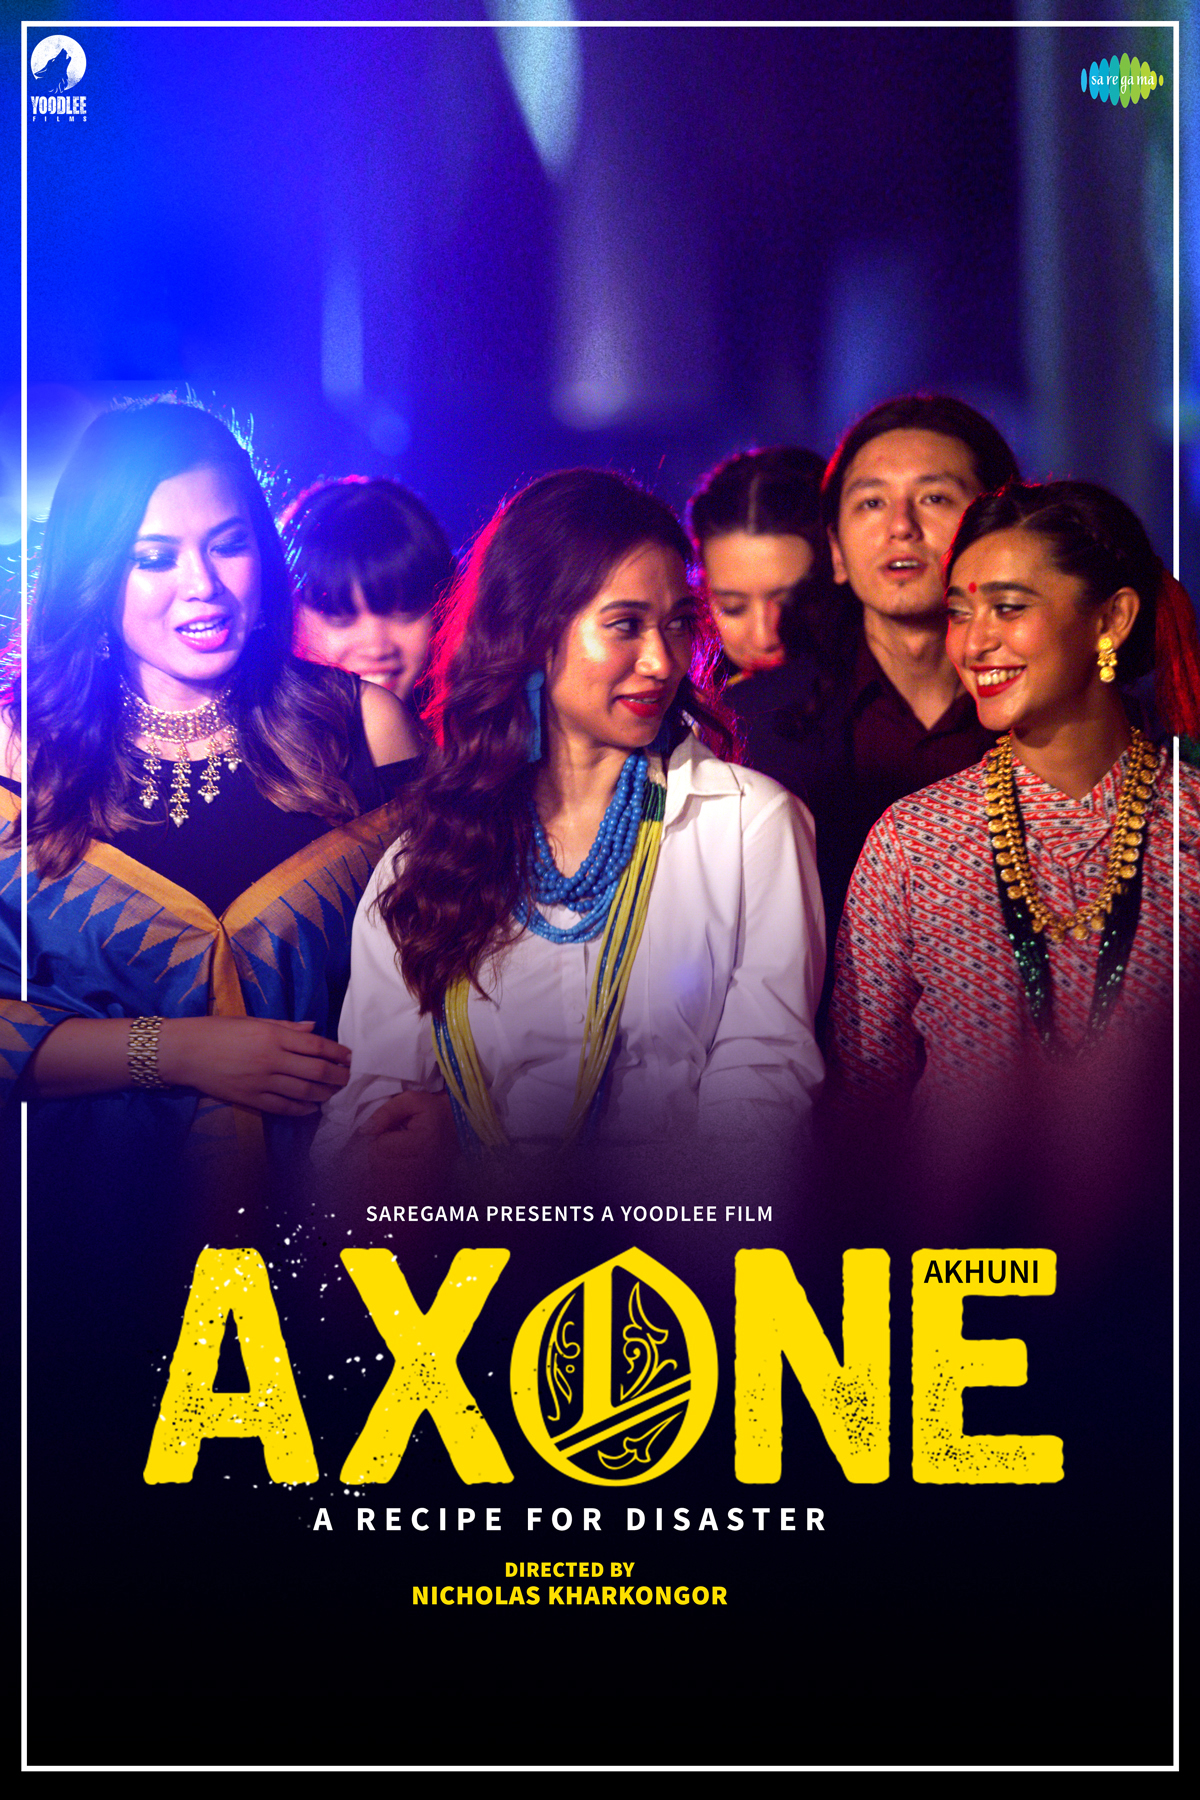 Axone is one of the latest movies on OTT platform in India